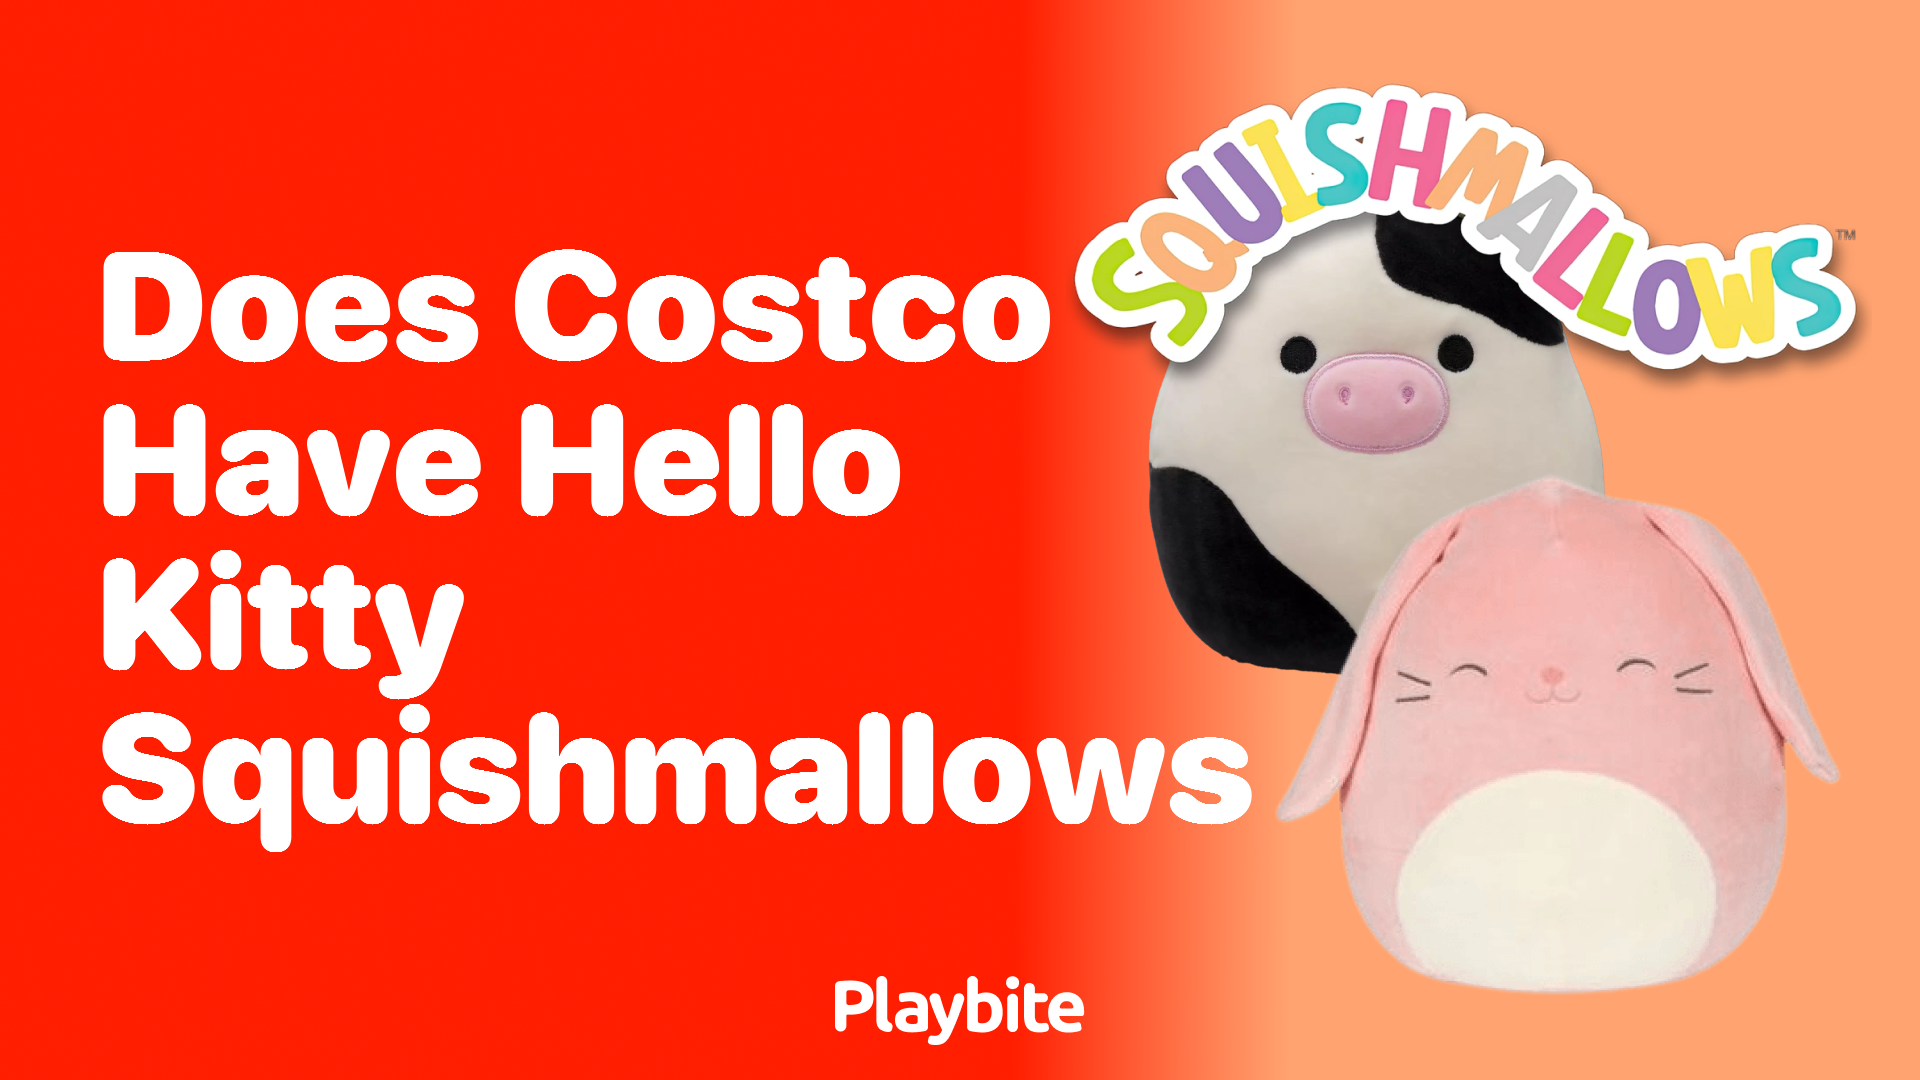 Does Costco Have Hello Kitty Squishmallows?